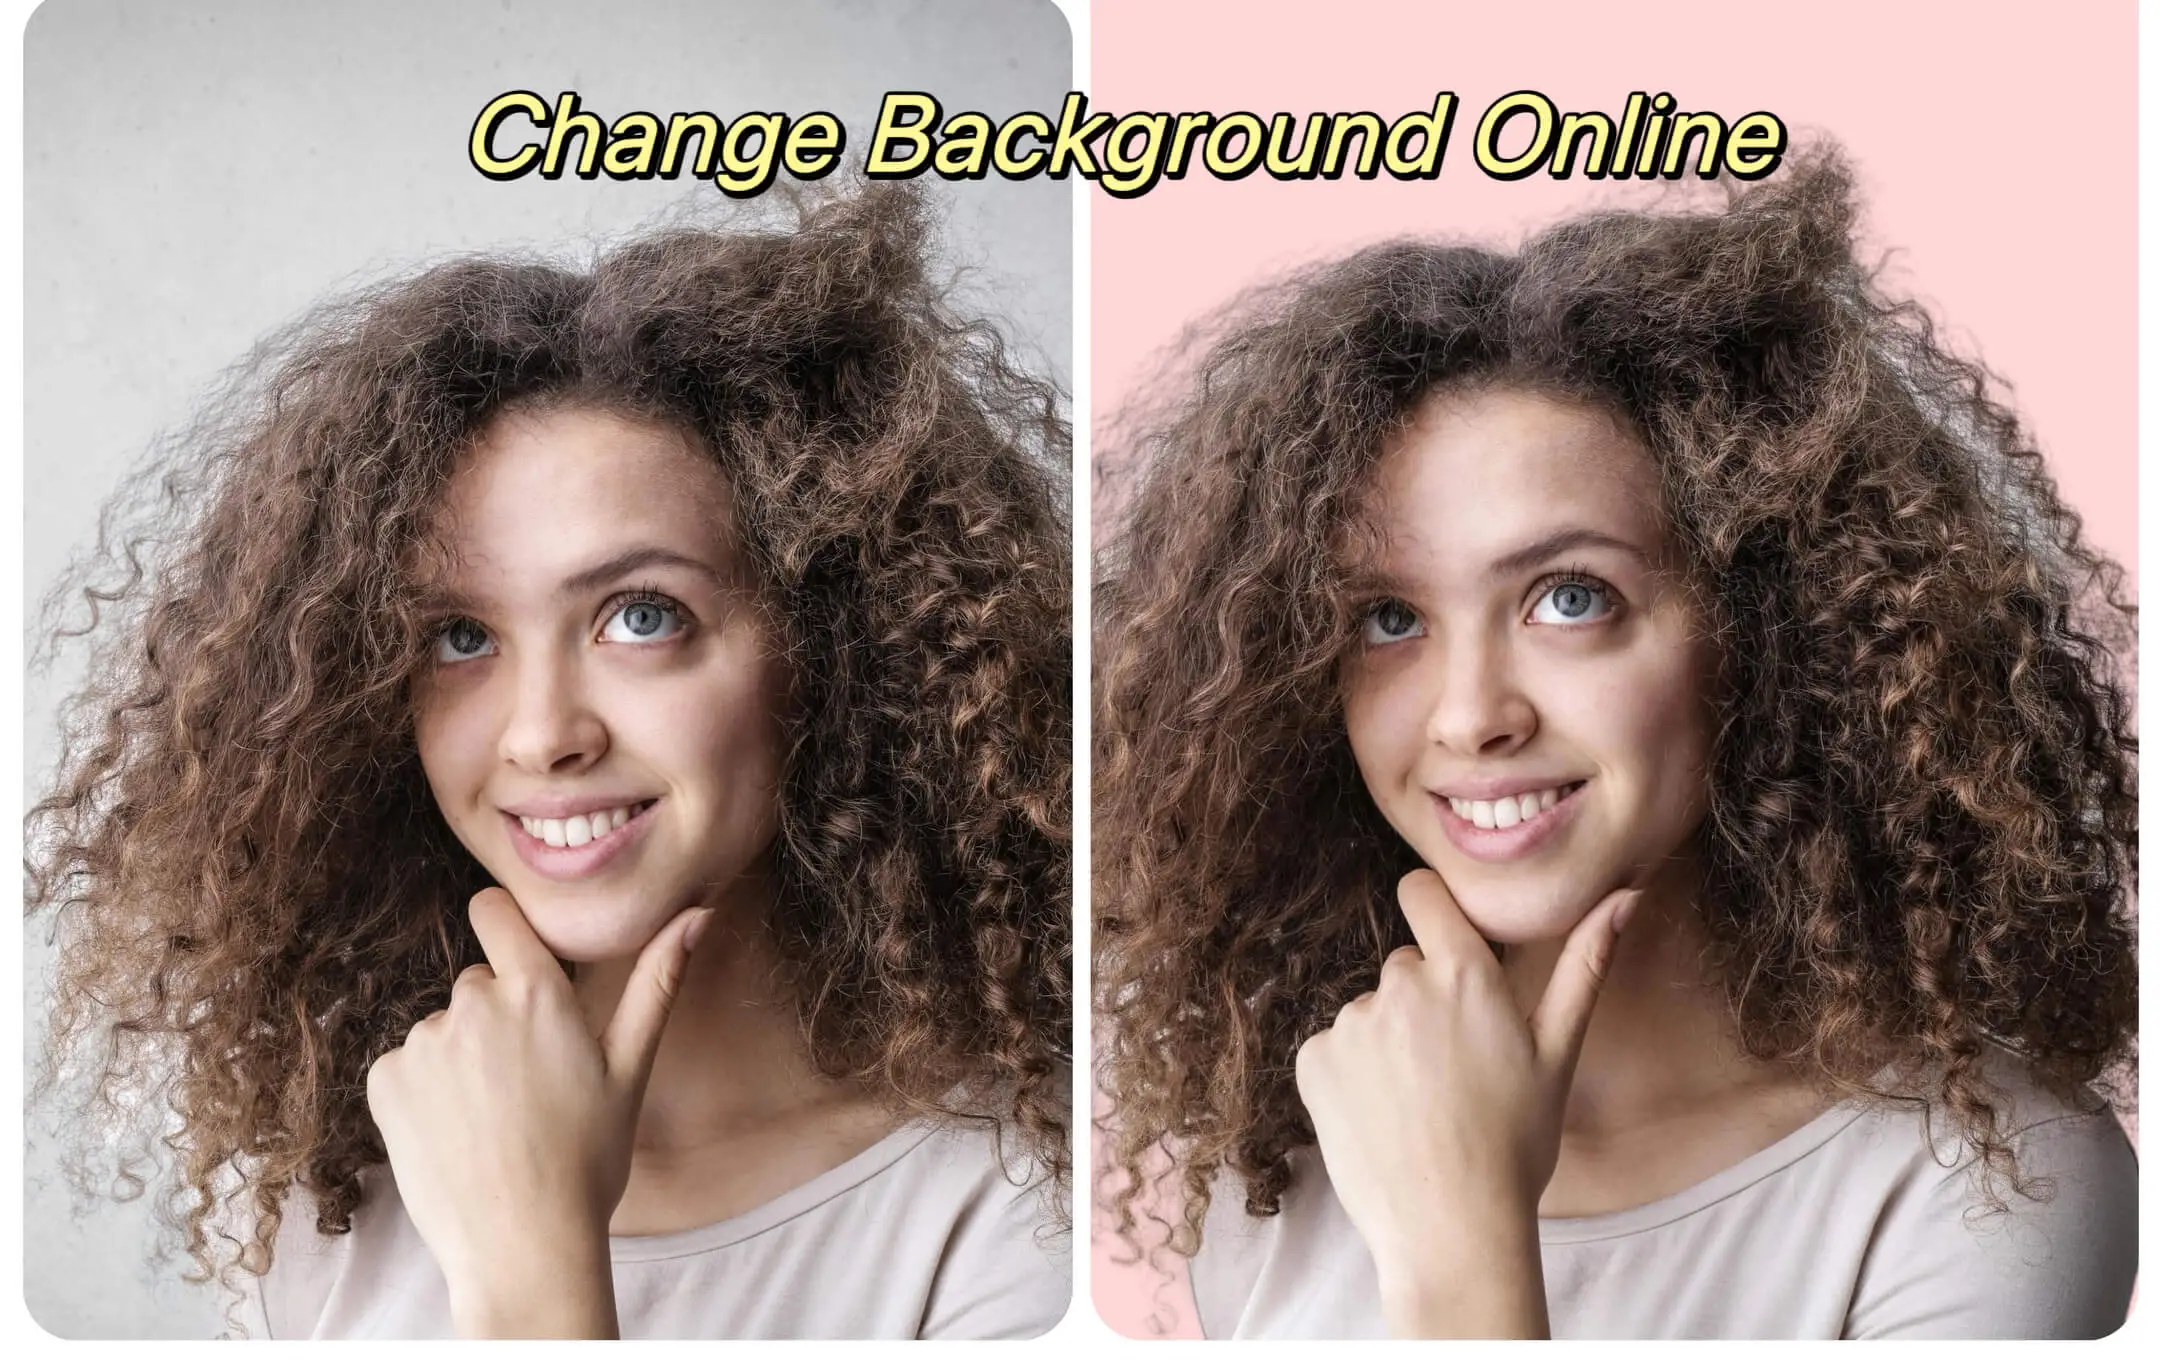 Interface of an online tool for changing photo backgrounds effortlessly and quickly.